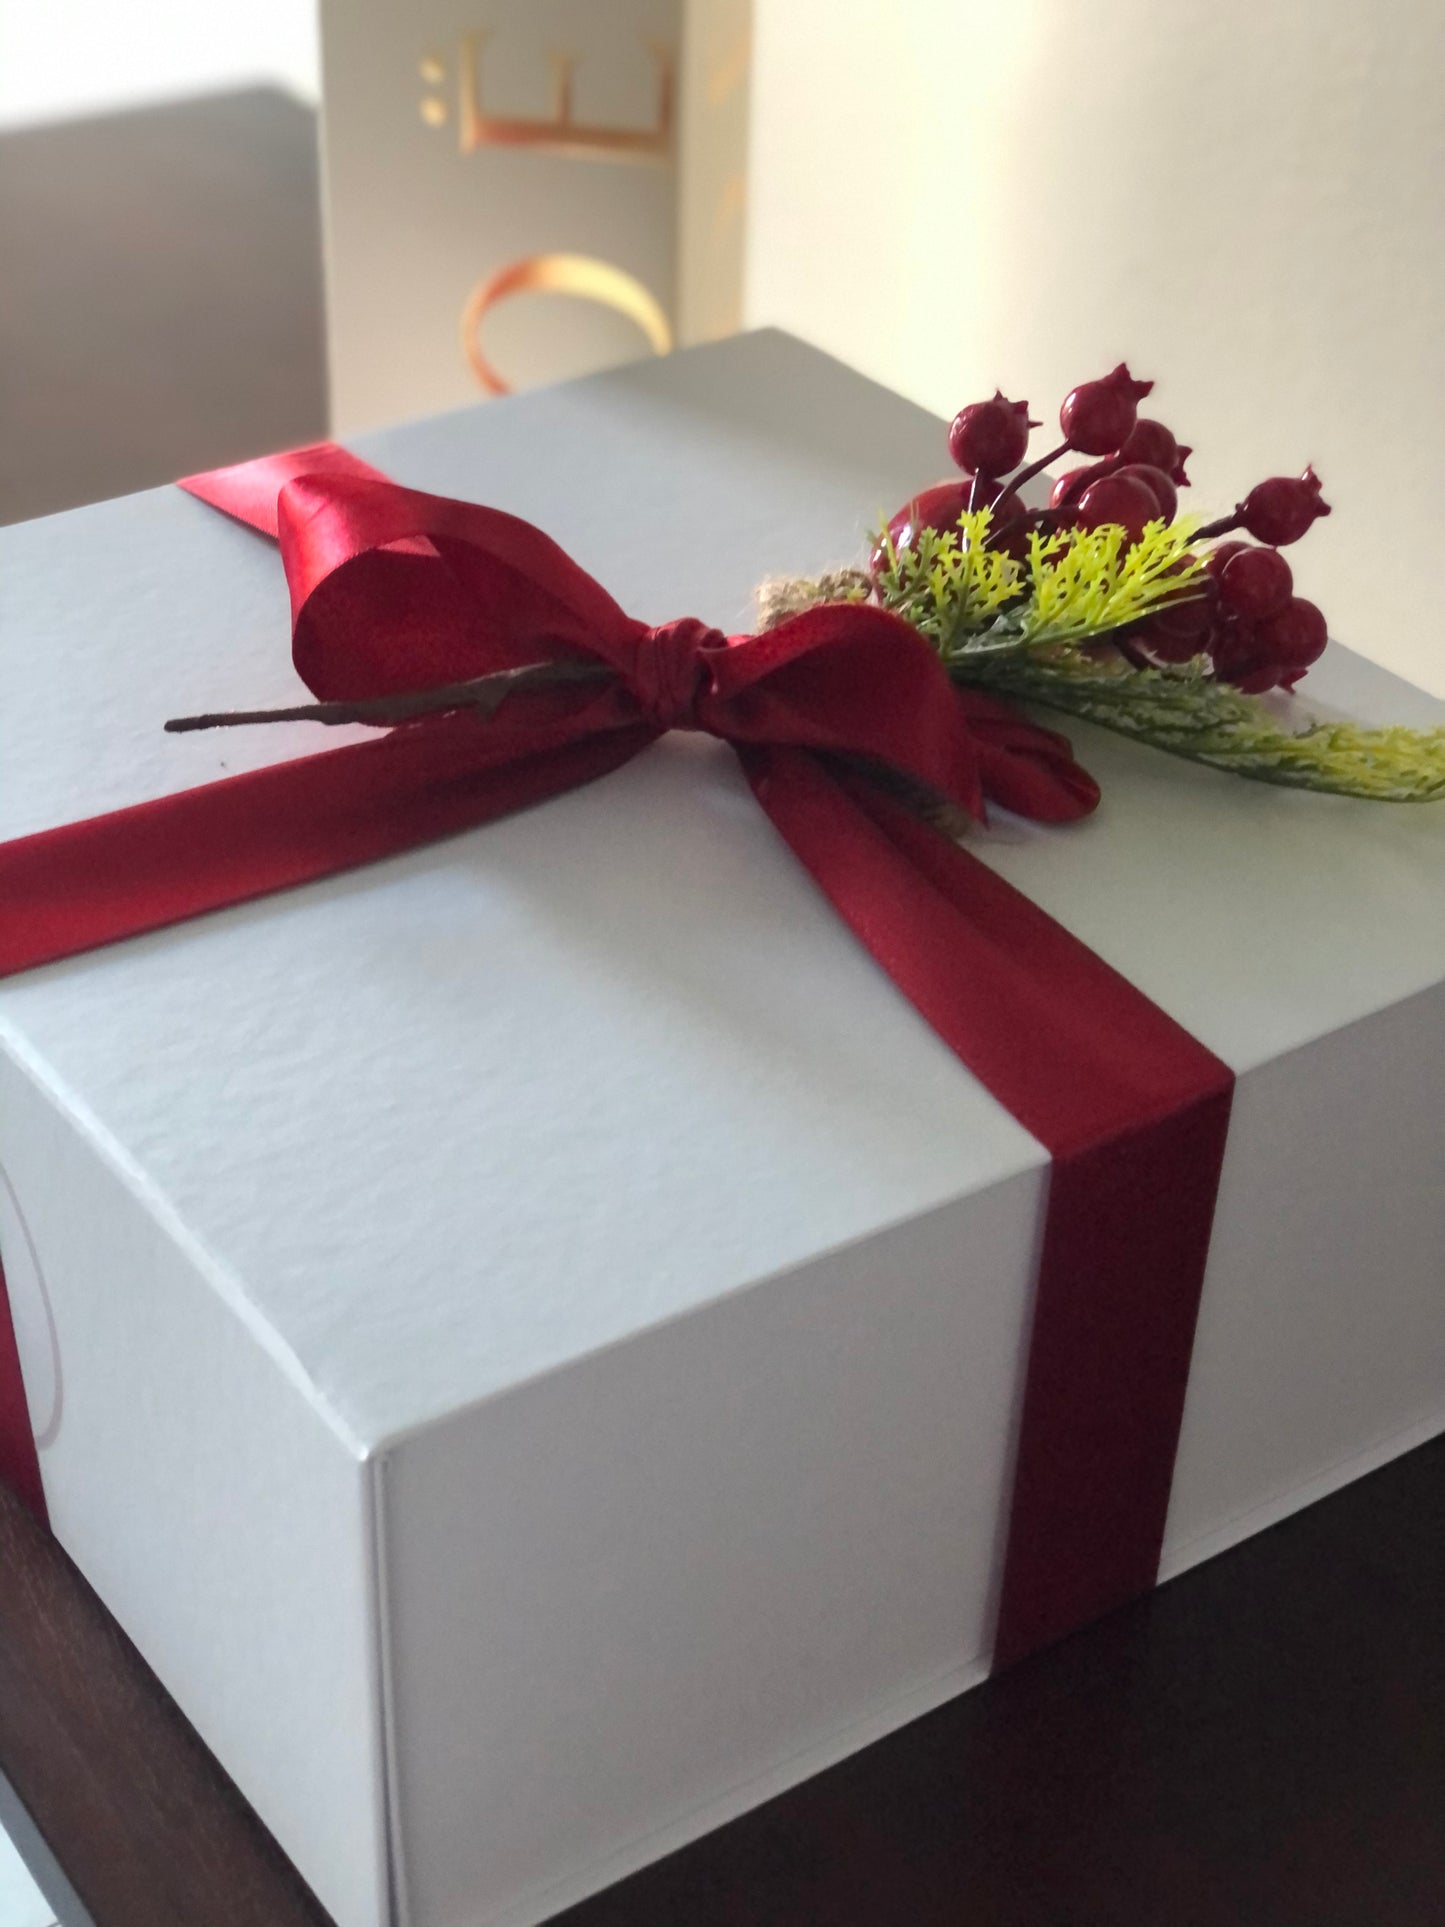 The Ultimate Mystery Gift Boxes - Christmas Edition